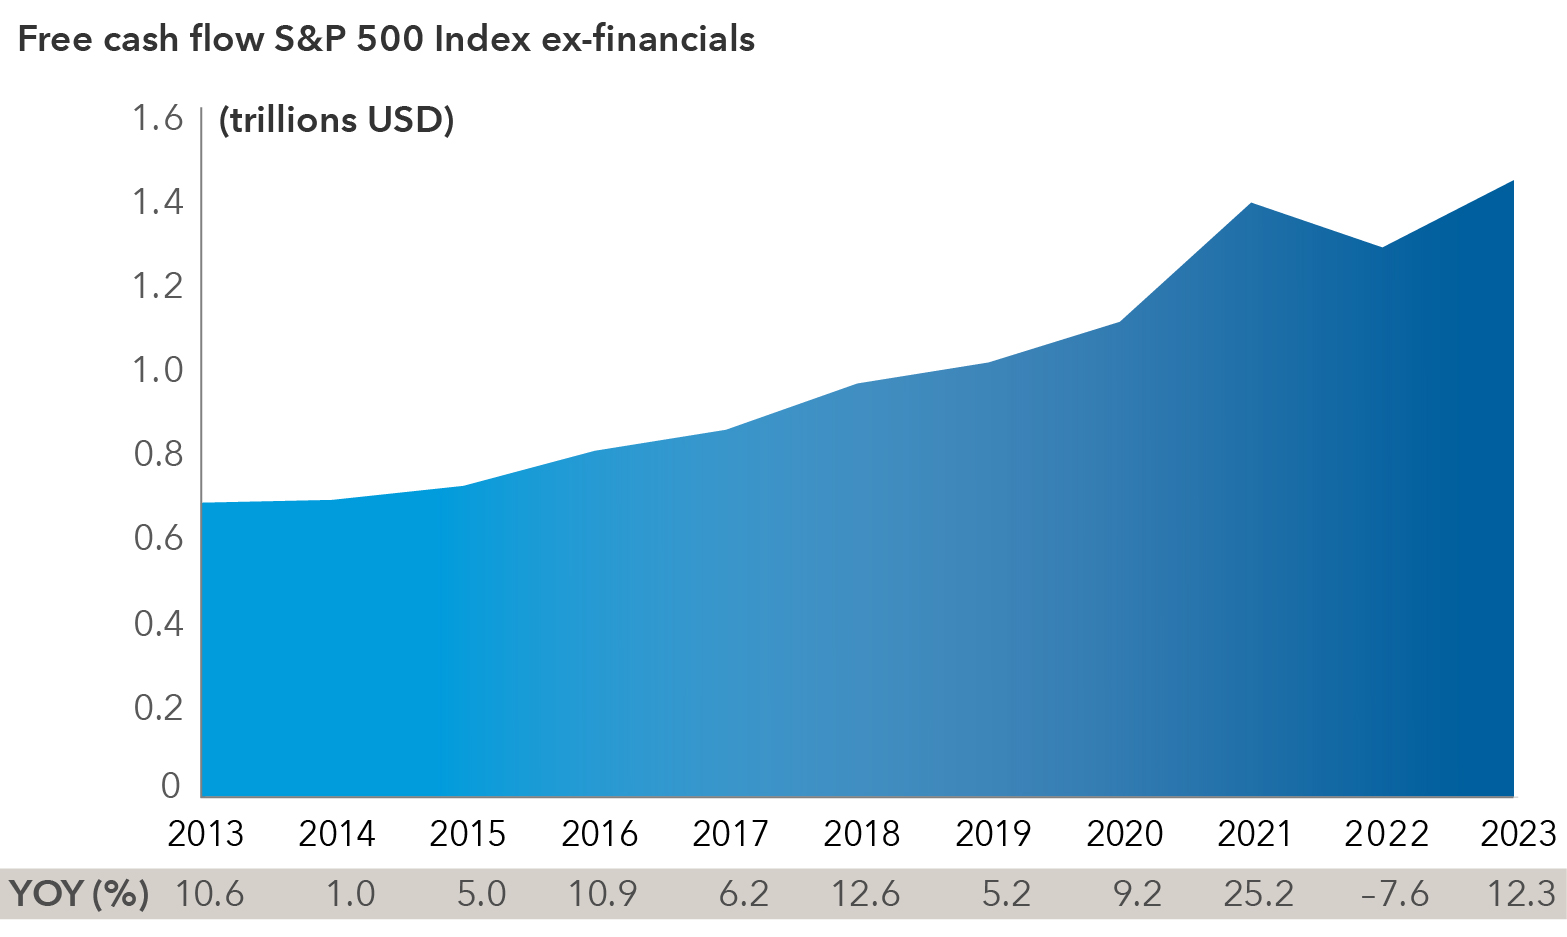 The shaded line chart displays free cash flow from S&P 500 Index companies, excluding financials. The data ranges from 2013 until 2023. The free cash flow total in 2013 is just under $700 billion and steadily grew to nearly $1.5 trillion in 2023. Also portrayed is the year-over-year percentage growth in the same time frame. In 2023, free cash flow grew 12.3% year over year. 